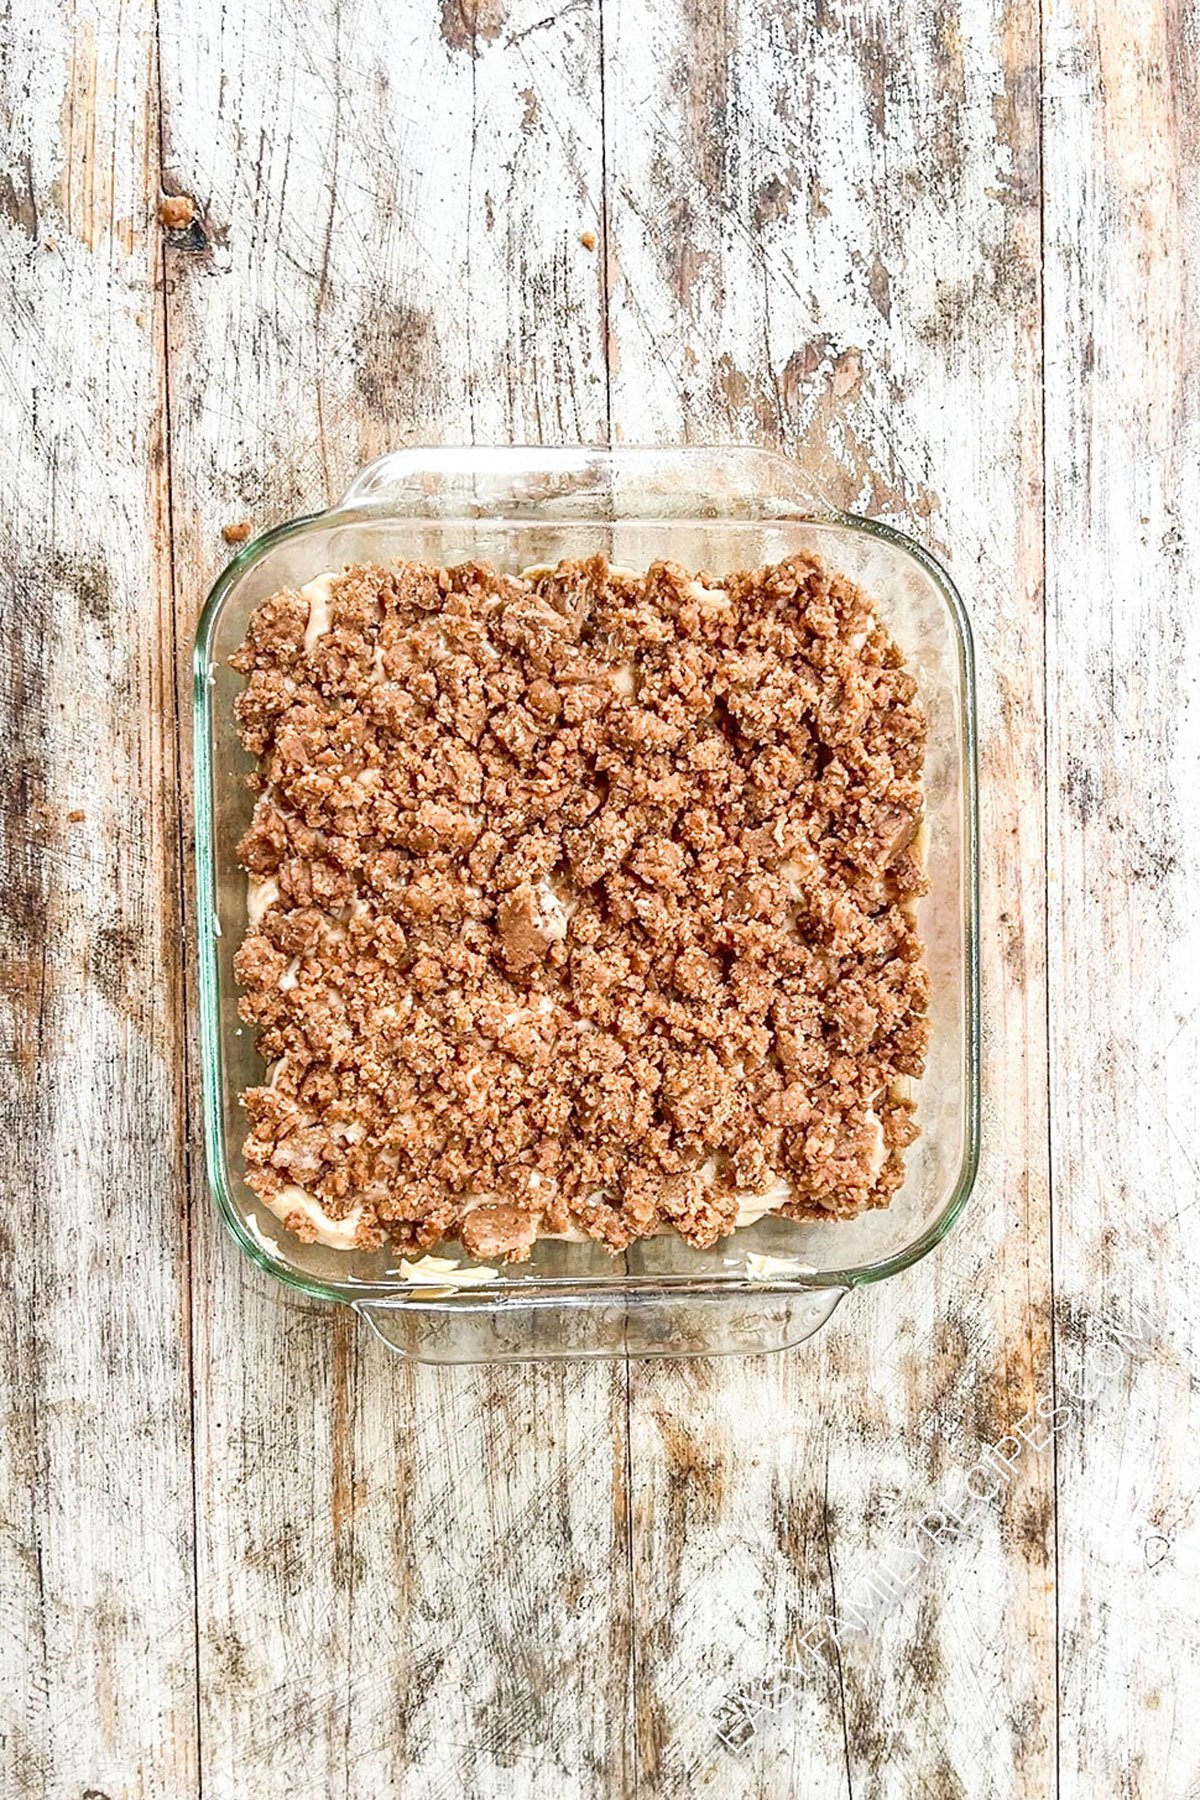 A glass baking dish half full of cinnamon crumble coffee cake batter, with the cinnamon crumble layer being added.